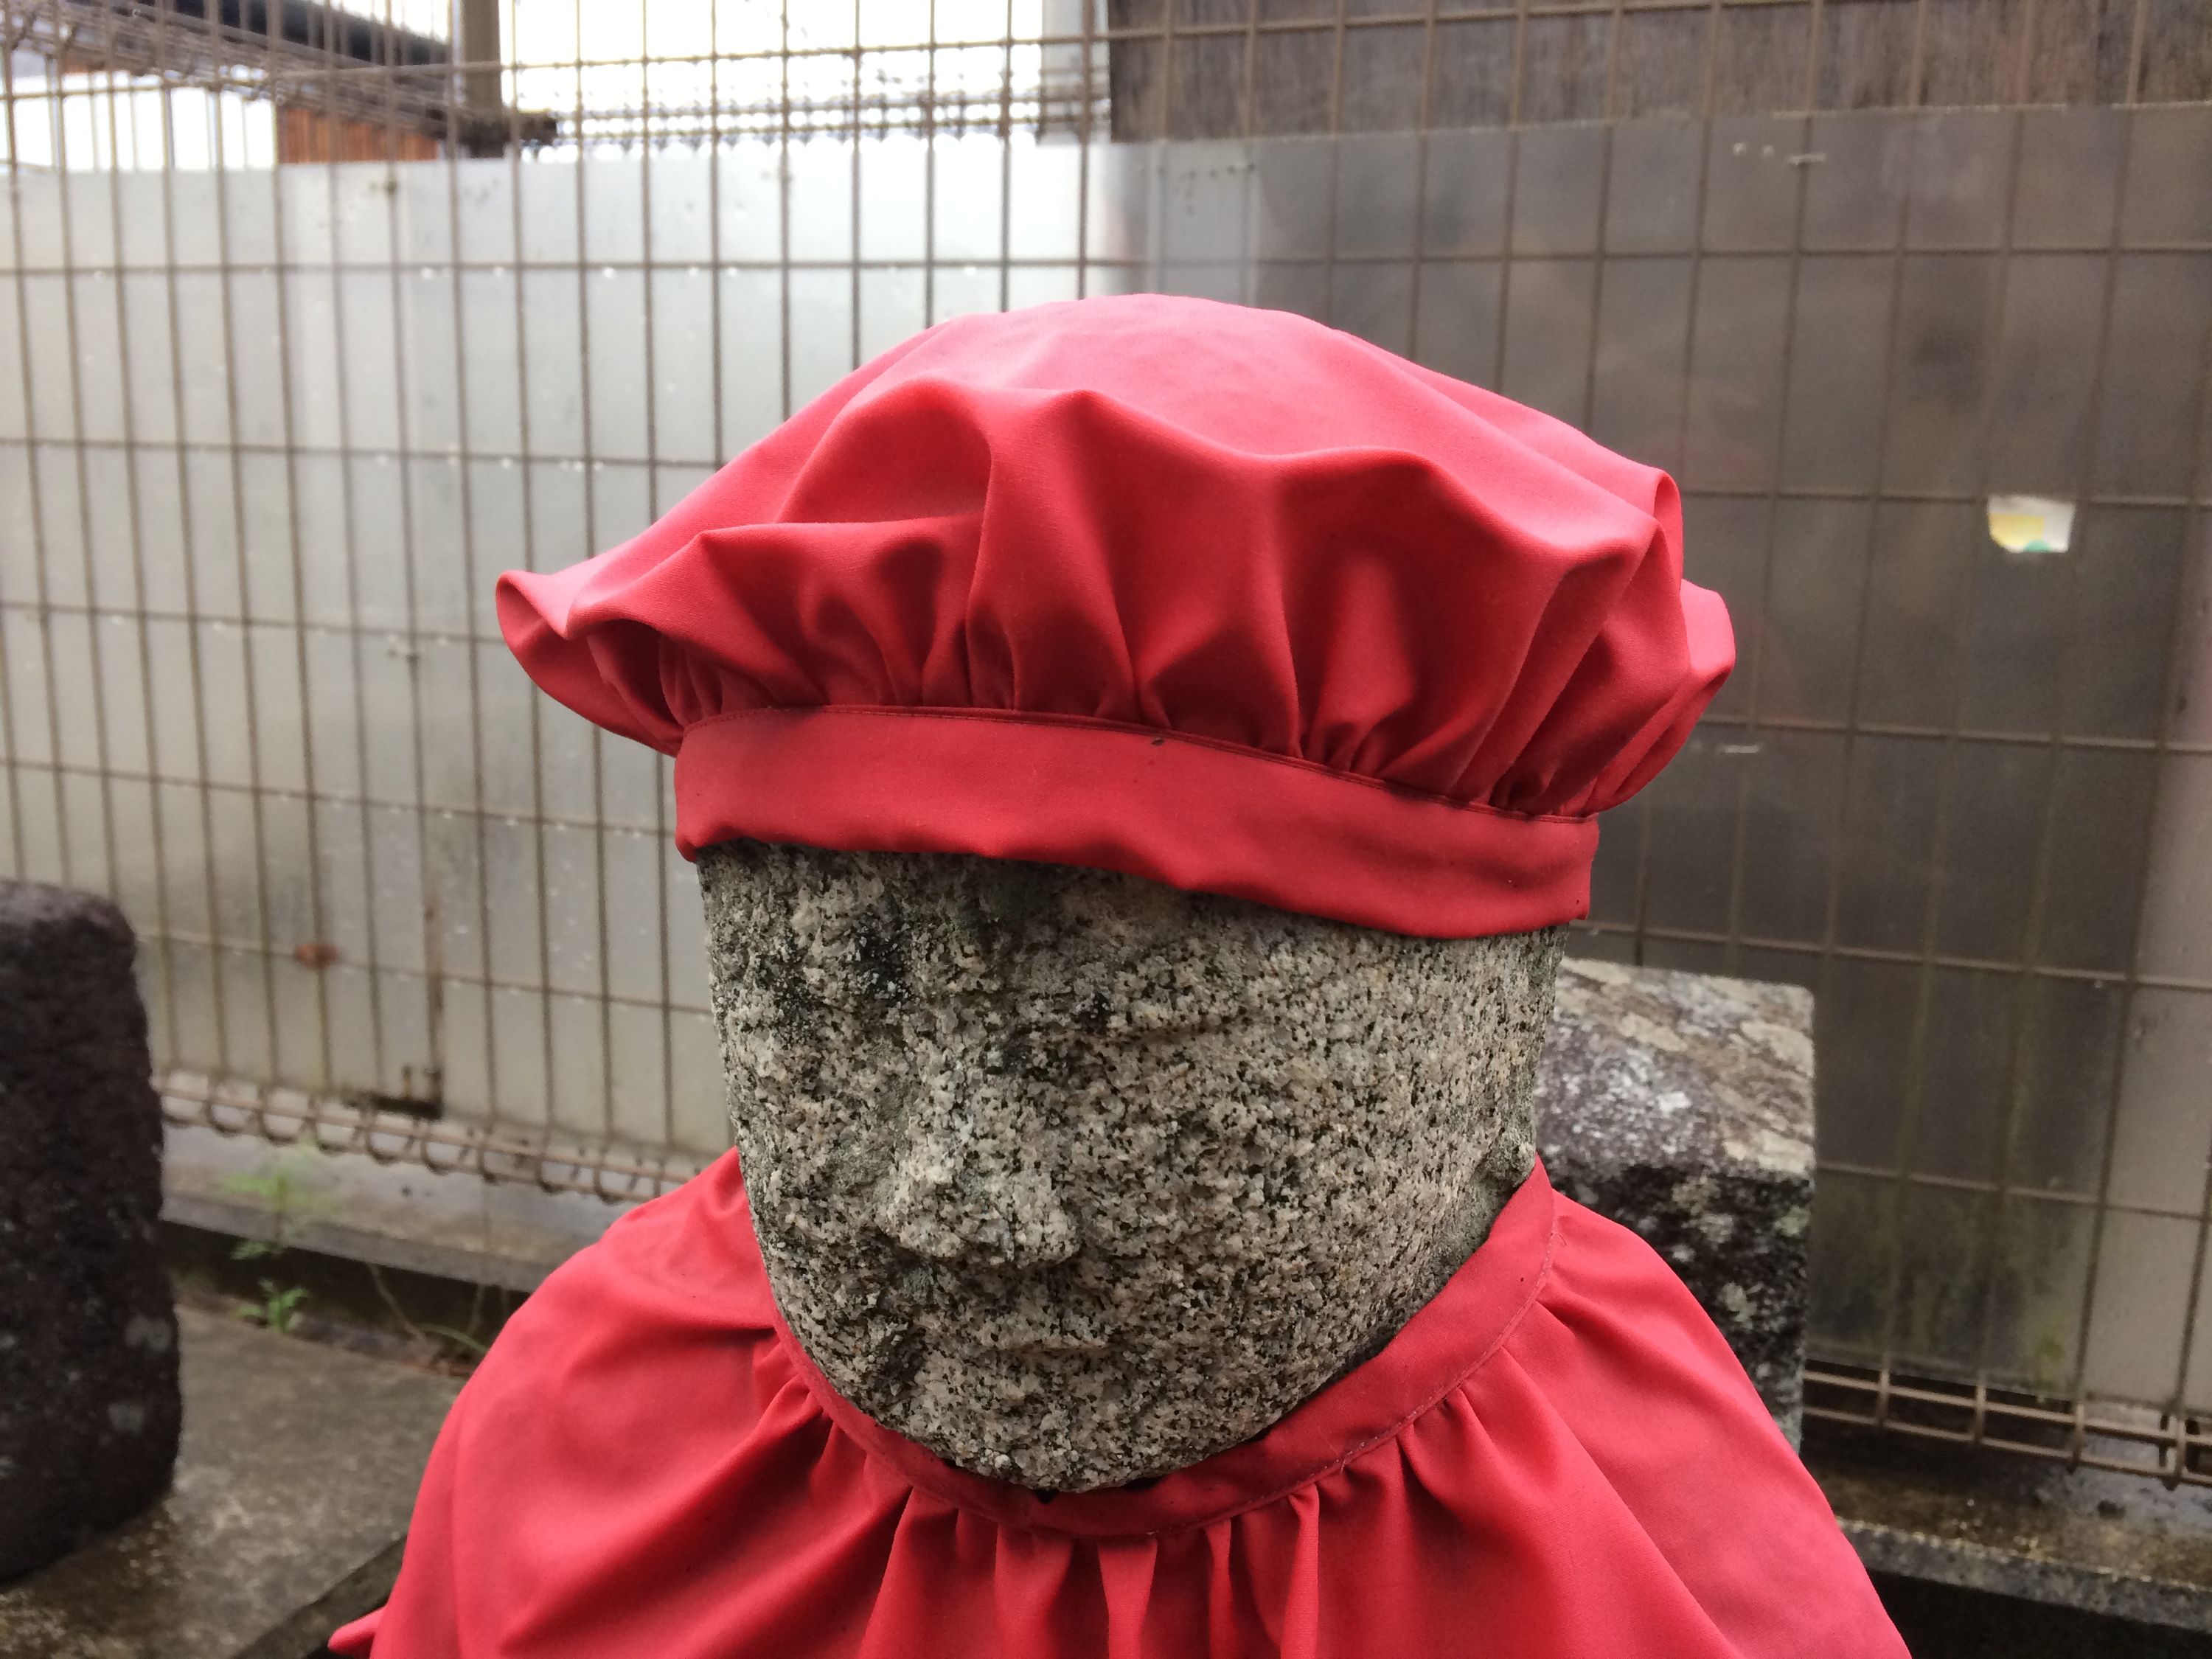 The head of a buddhist roadside deity dressed in a red cap and a red apron.